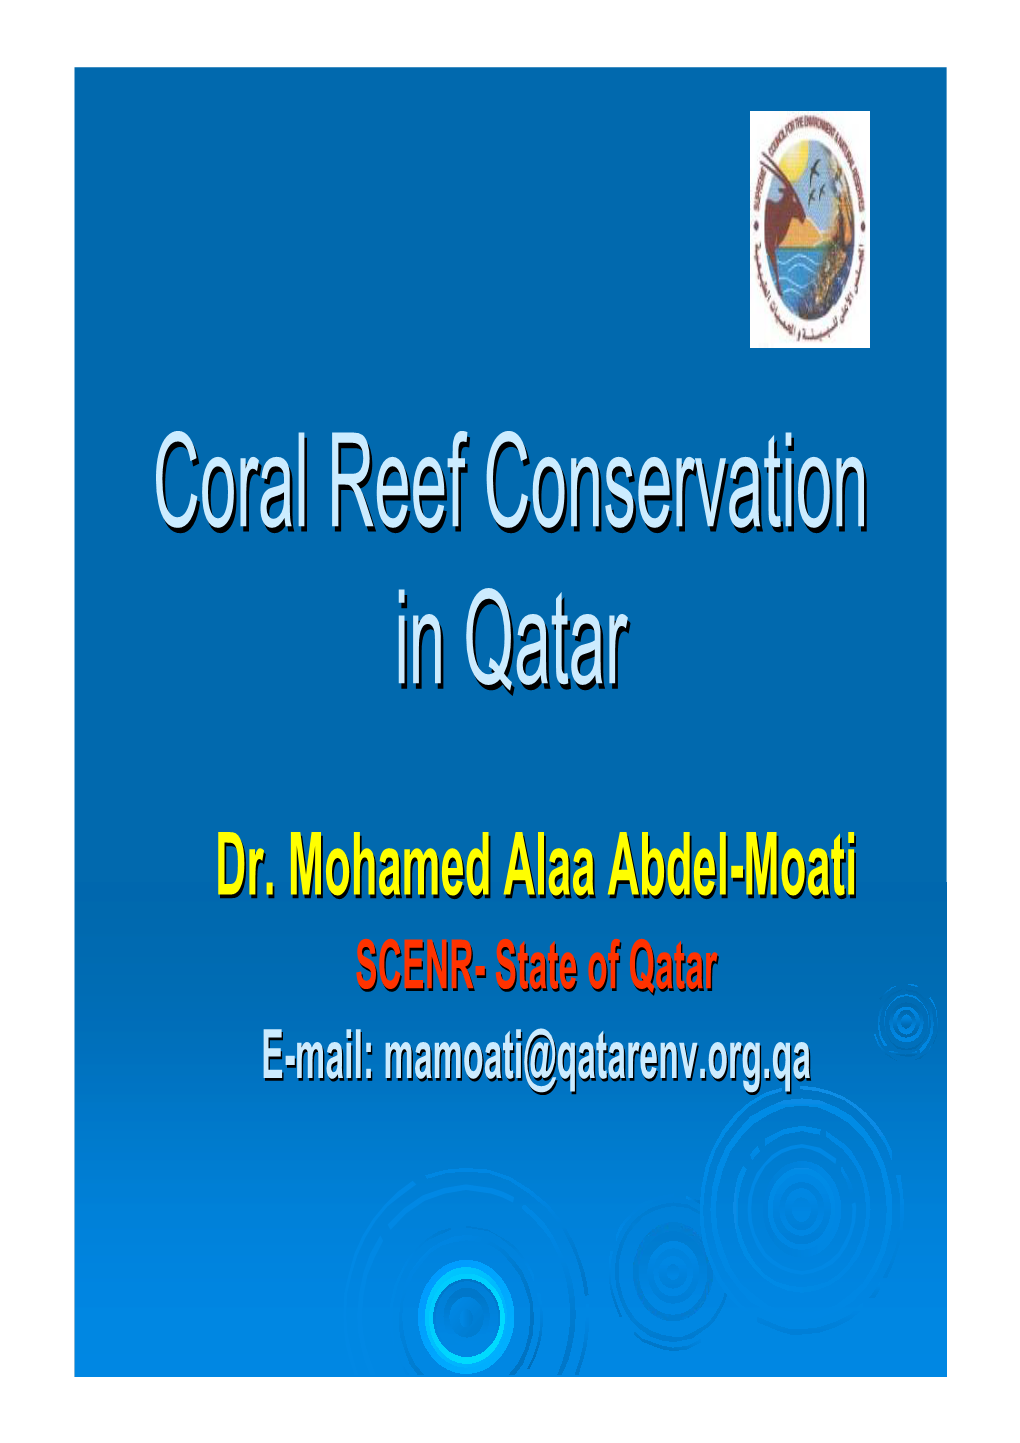 Coral Reef Conservation in Qatar